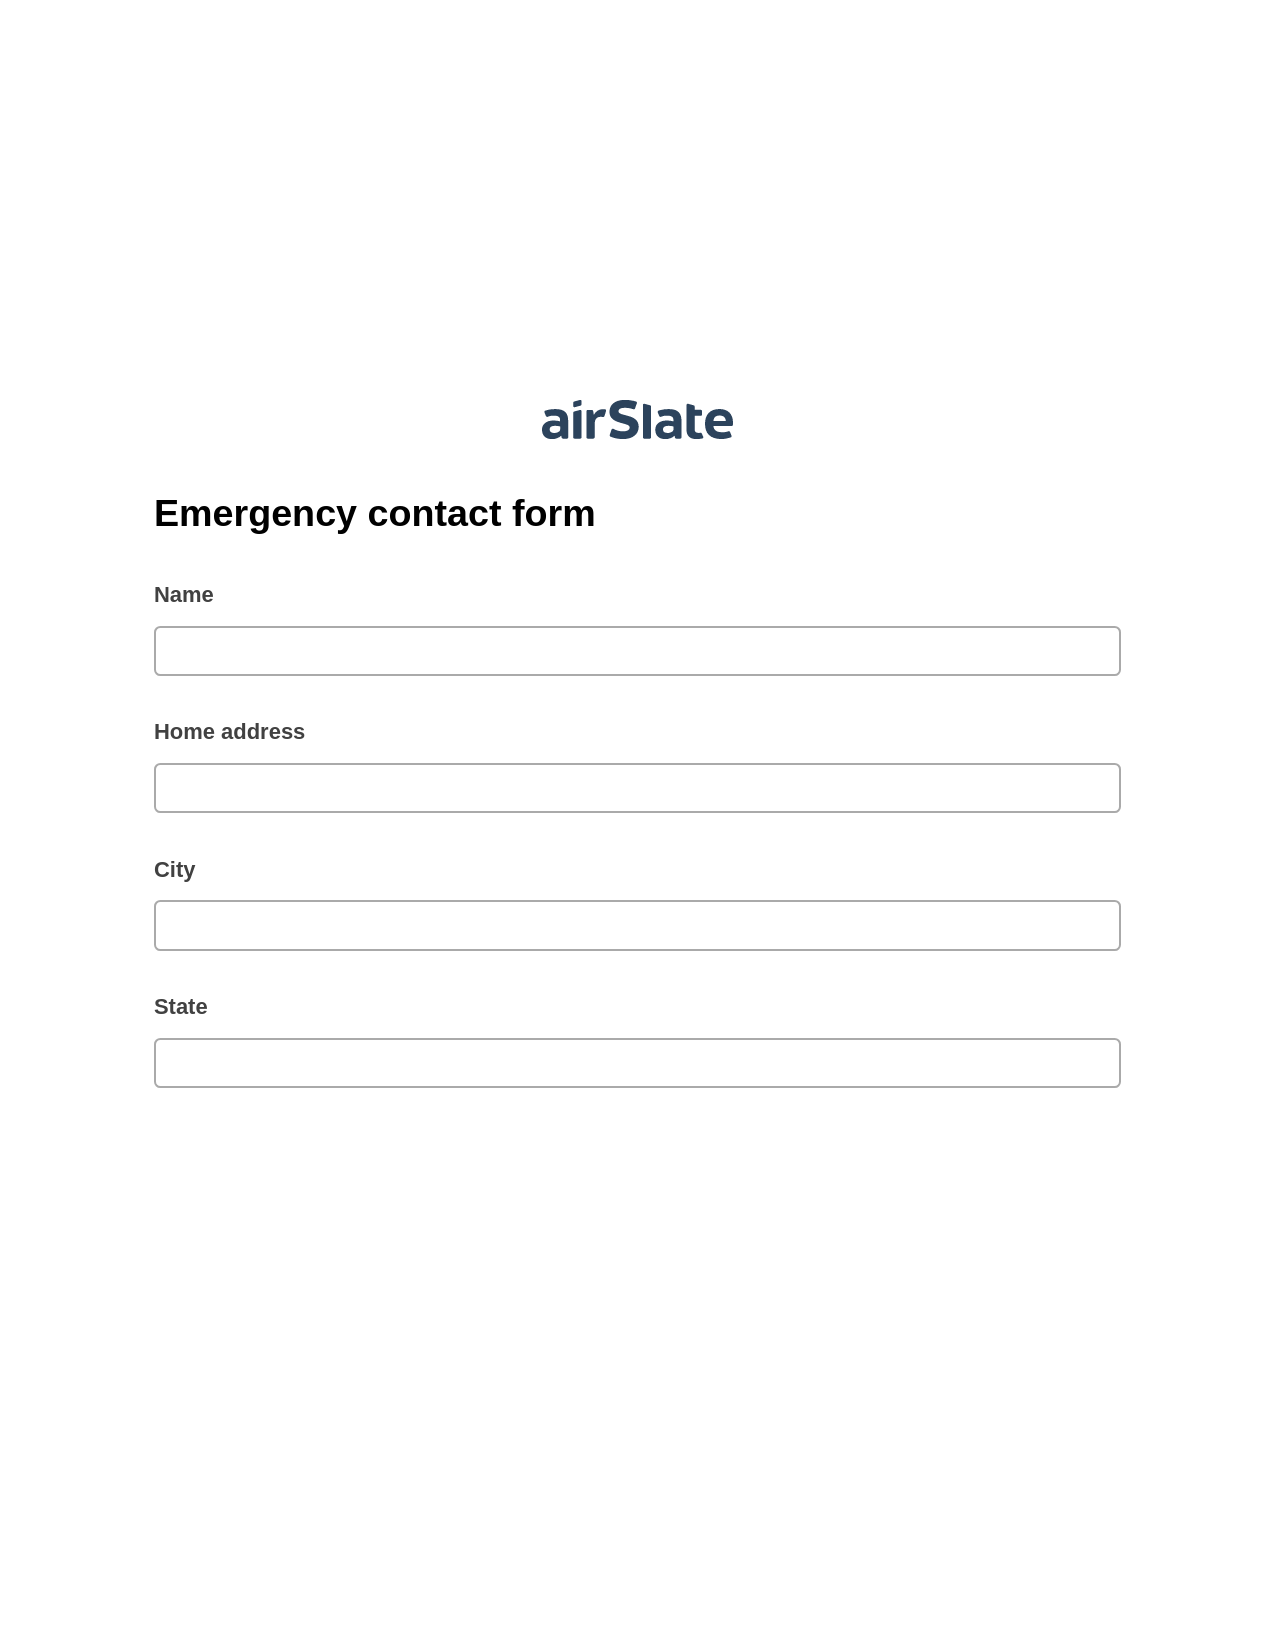 Emergency contact form Pre-fill from Salesforce Record Bot, Update NetSuite Records Bot, Post-finish Document Bot